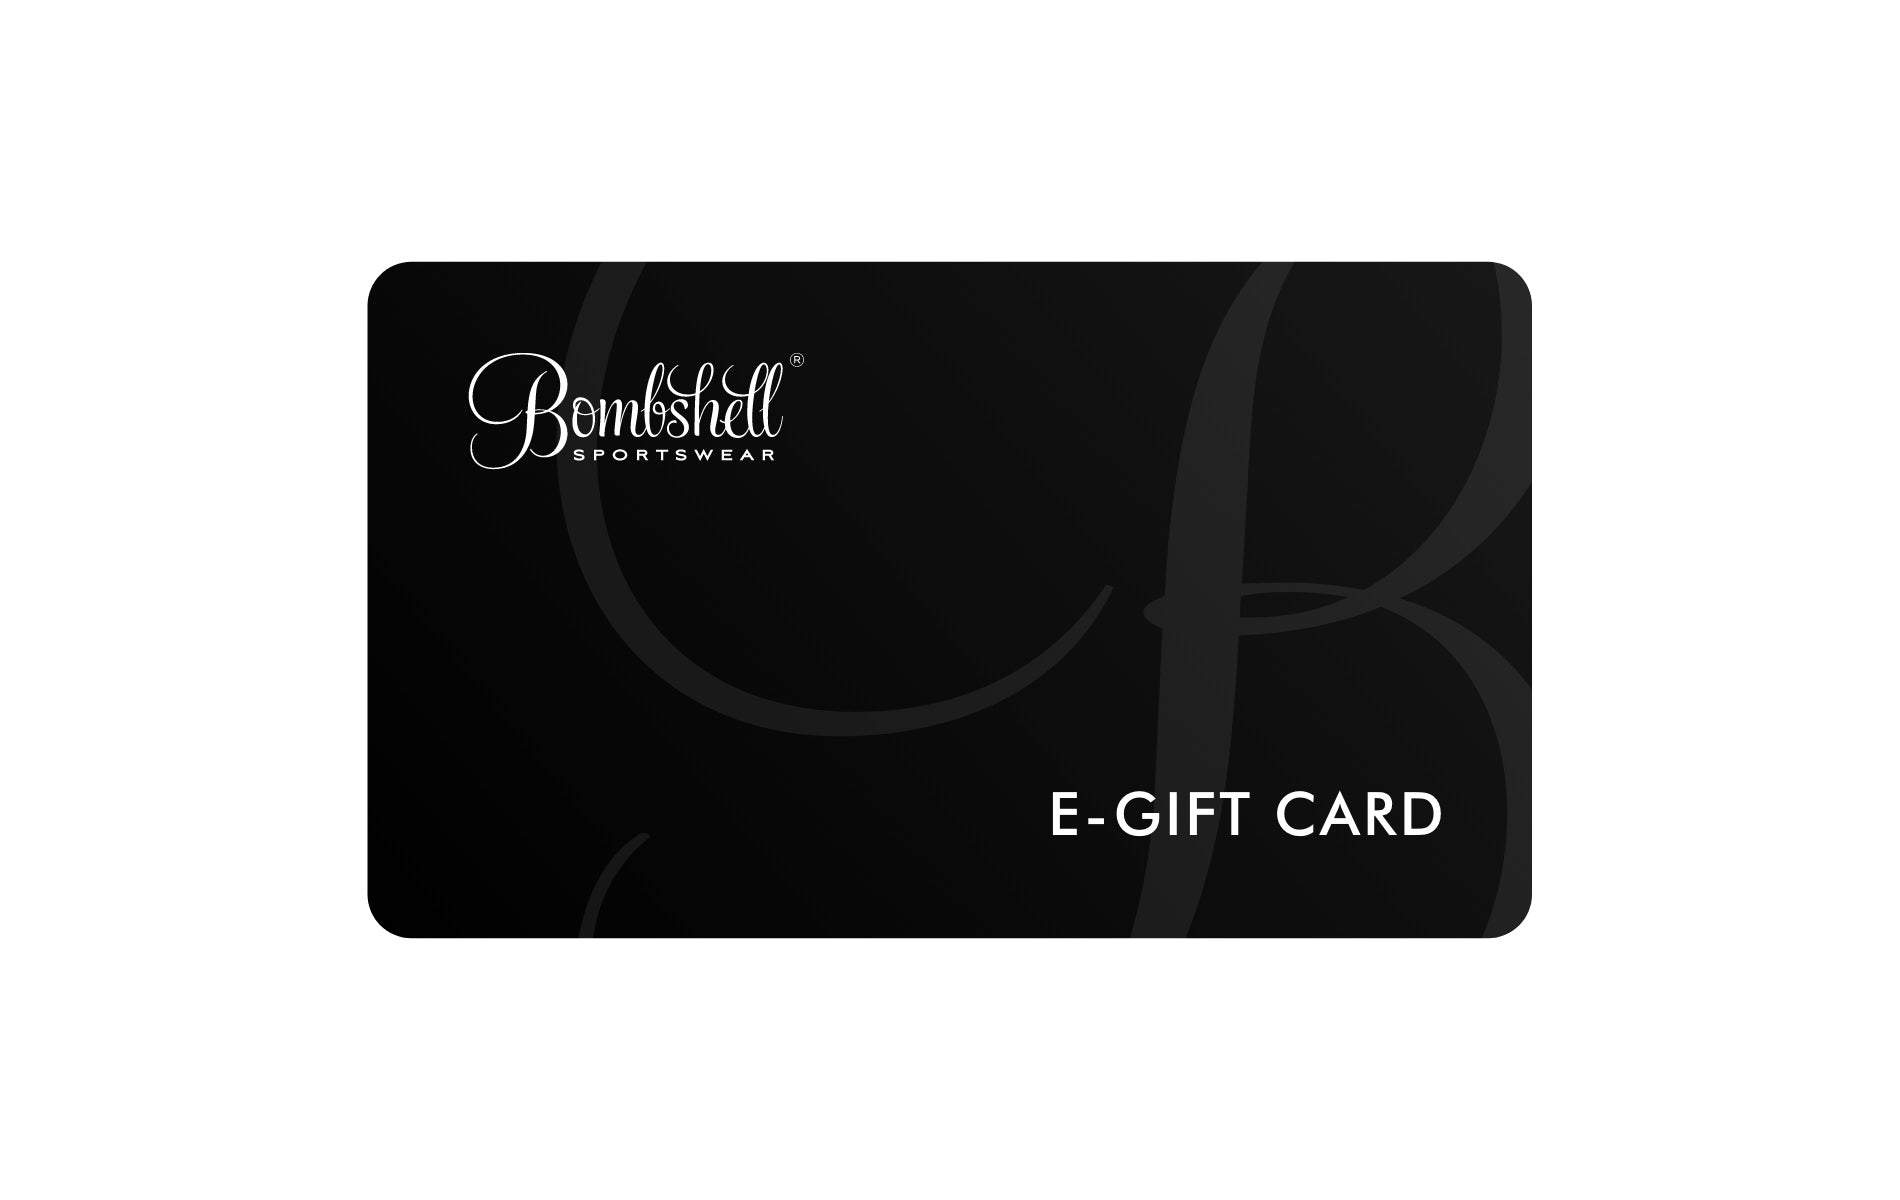 image of the bombshell sportswear online giftcard - logo in top left, cursive b in back, black background